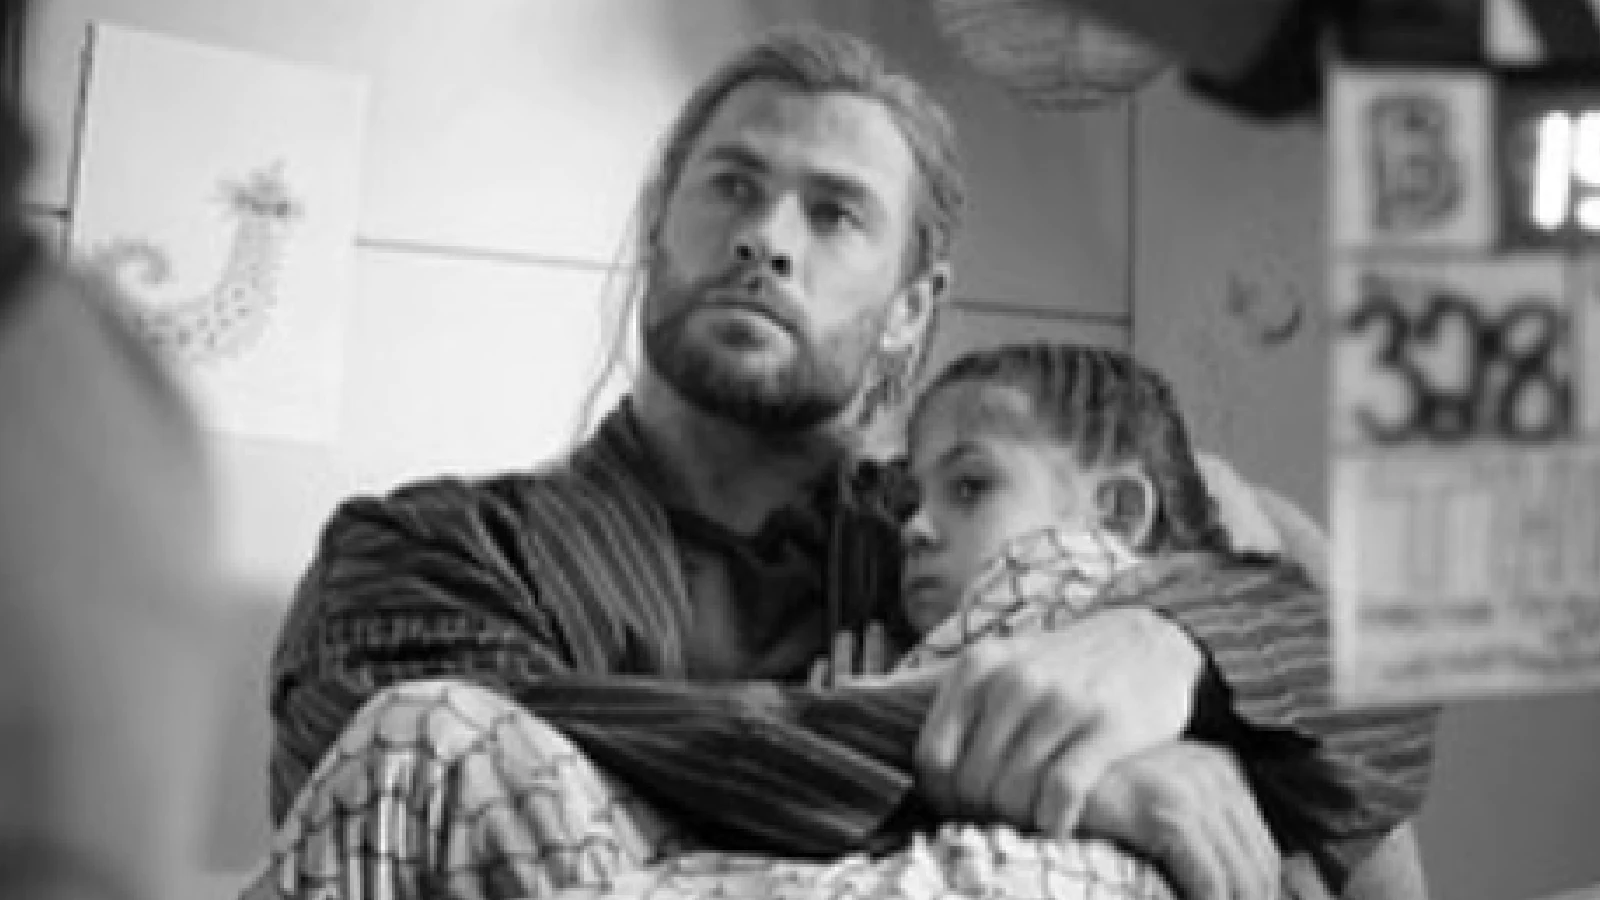 Chris Hemsworth Terms Daughter India Rose His 'Favourite Superhero'; See Adorable Pic From Thor Sets